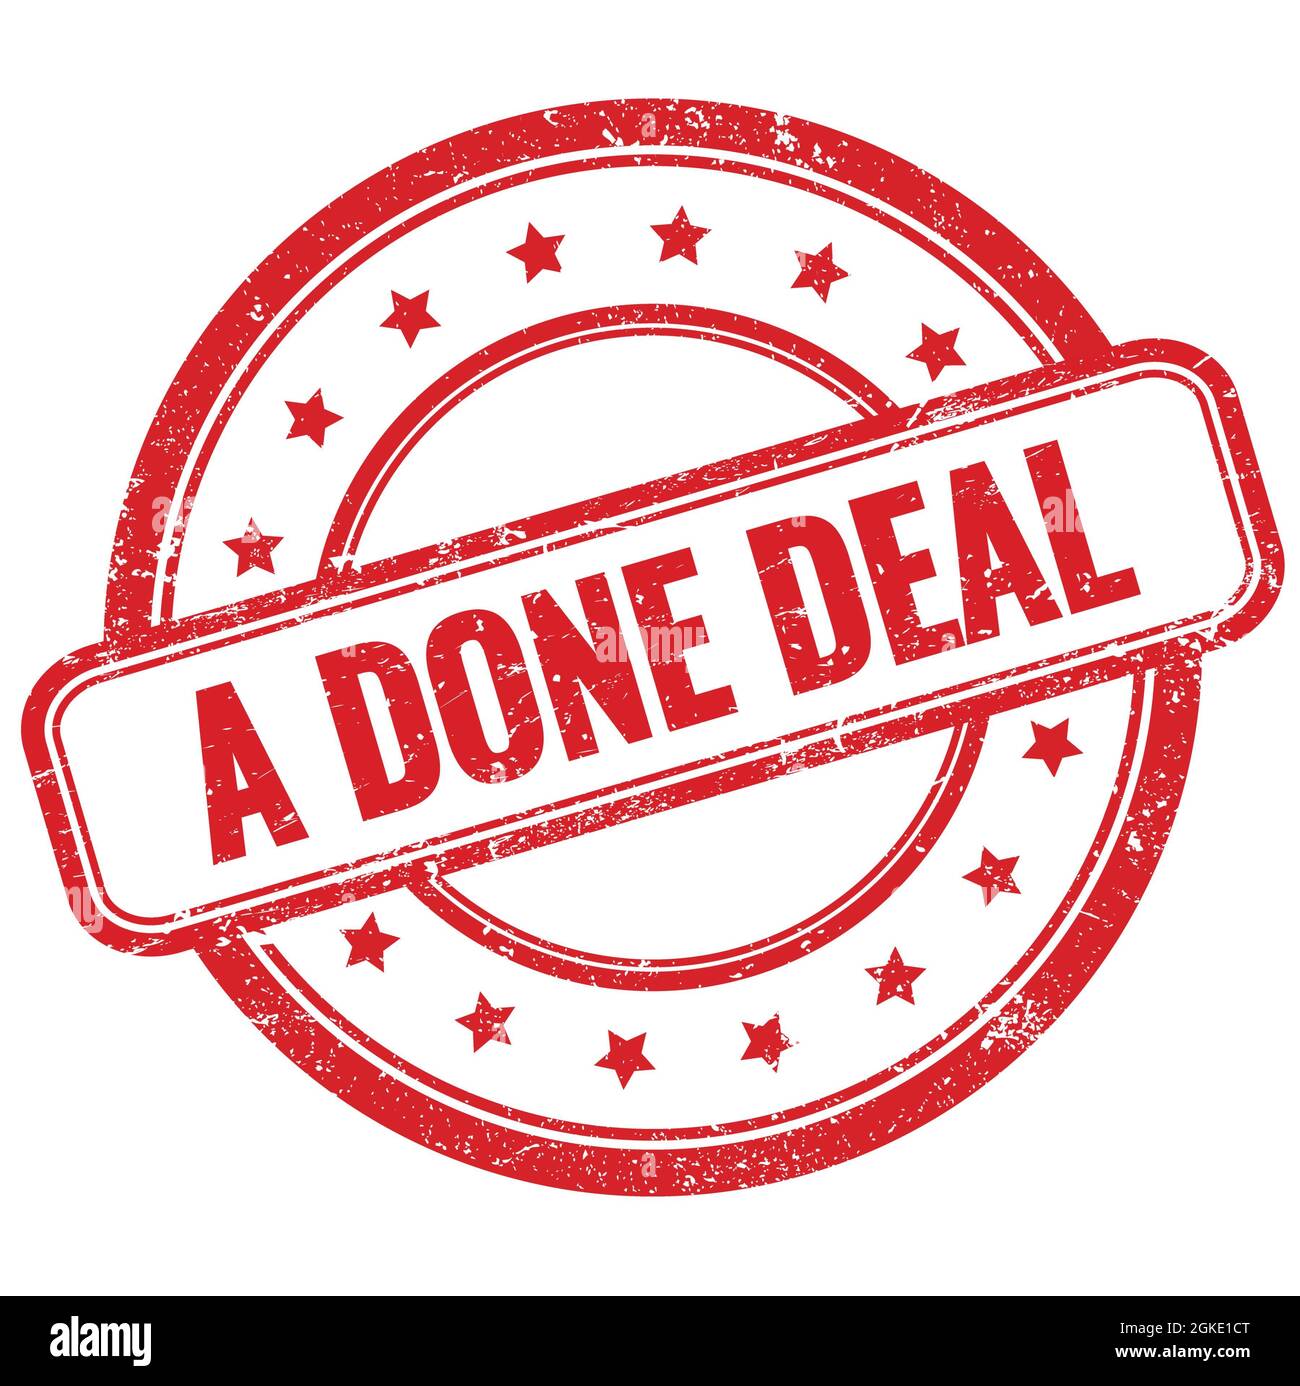 A DONE DEAL text on red vintage grungy round rubber stamp. Stock Photo